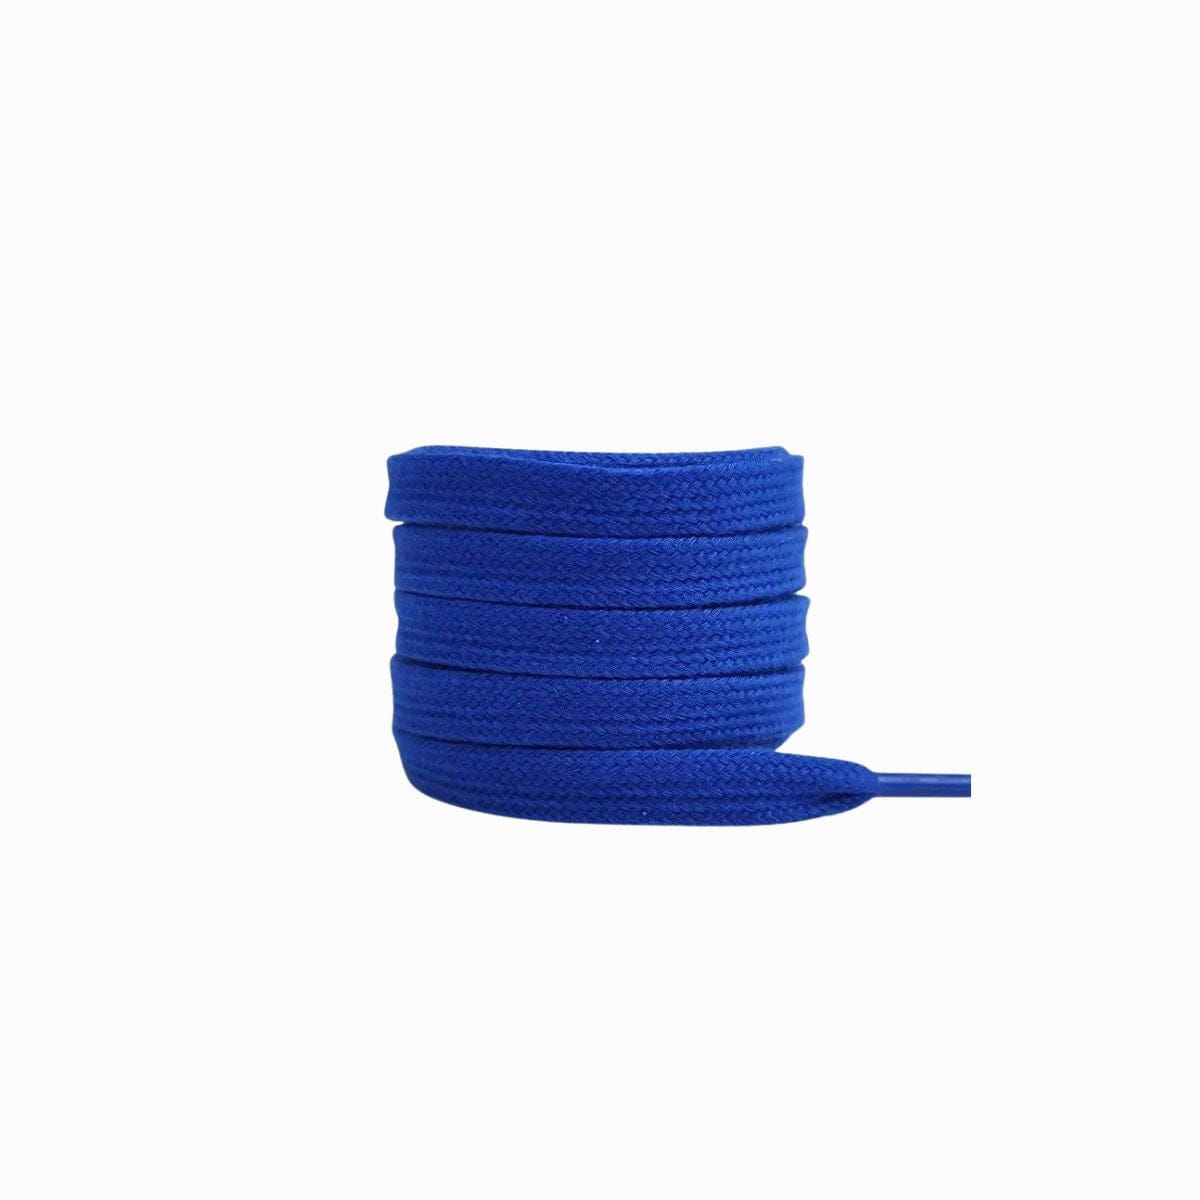 Royal Blue Replacement Adidas Shoe Laces for Adidas Samba Black Sneakers by Kicks Shoelaces